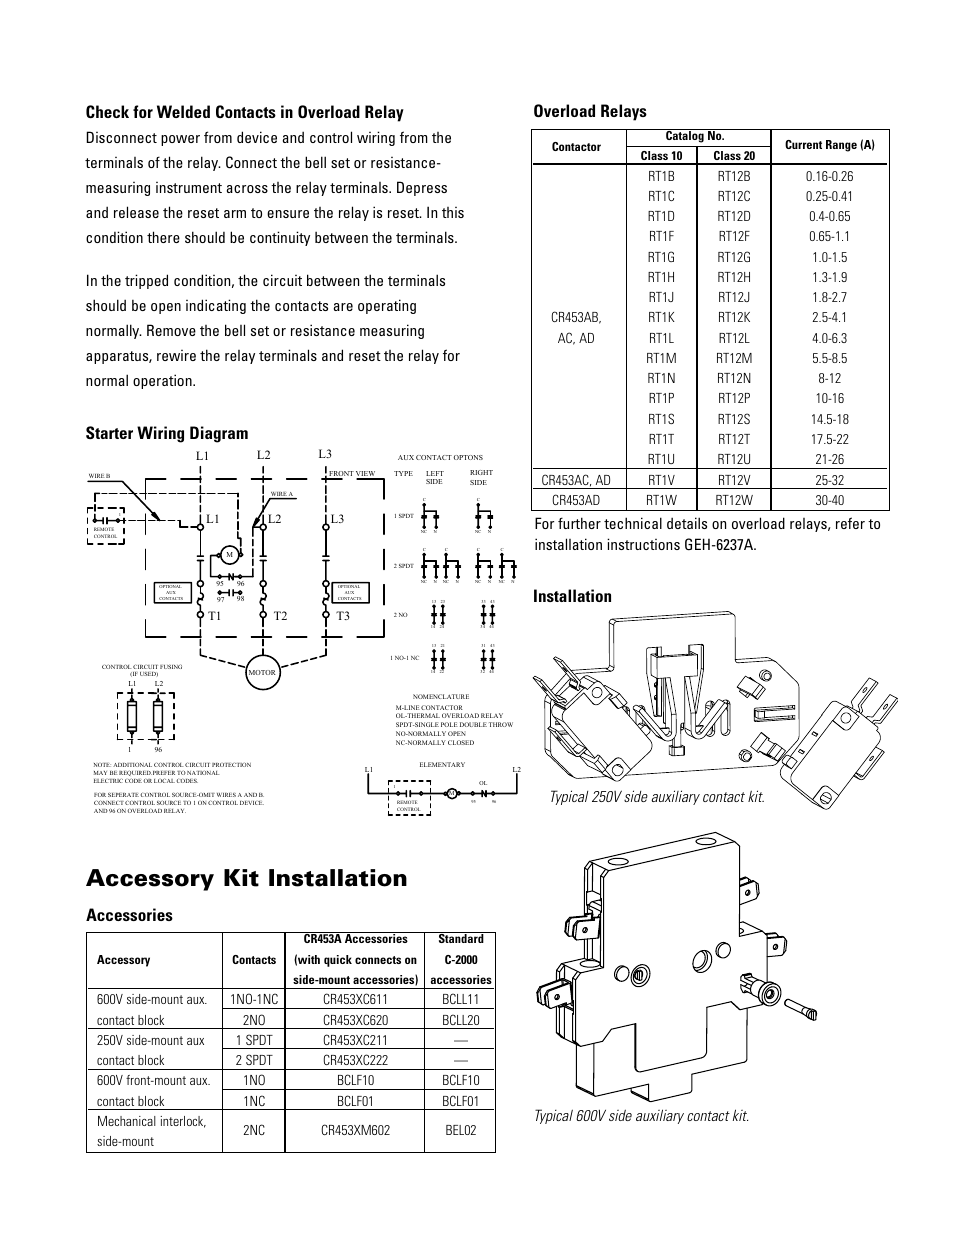 Accessory kit installation, Overload relays, Starter wiring diagram installation | GE Industrial Solutions CR454A Series Starters User Manual | Page 3 / 4